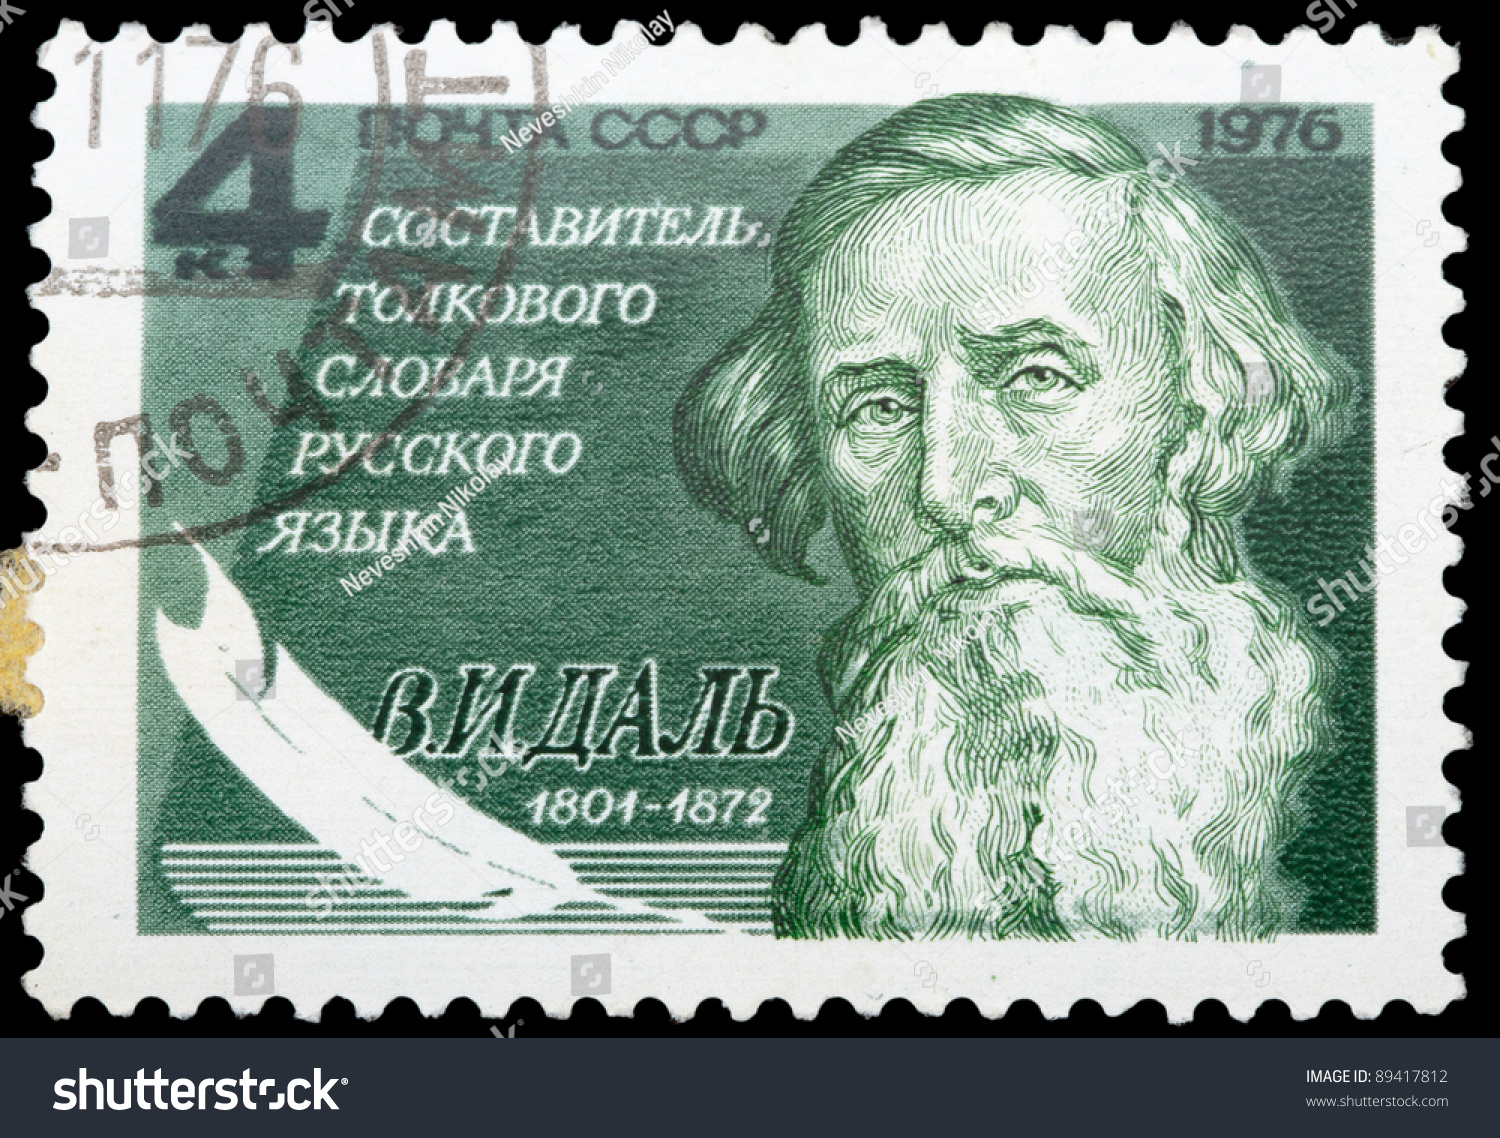 Ussr - Circa 1976: A Stamp Printed In The Ussr Shows V. Dal, Circa 1976 ...